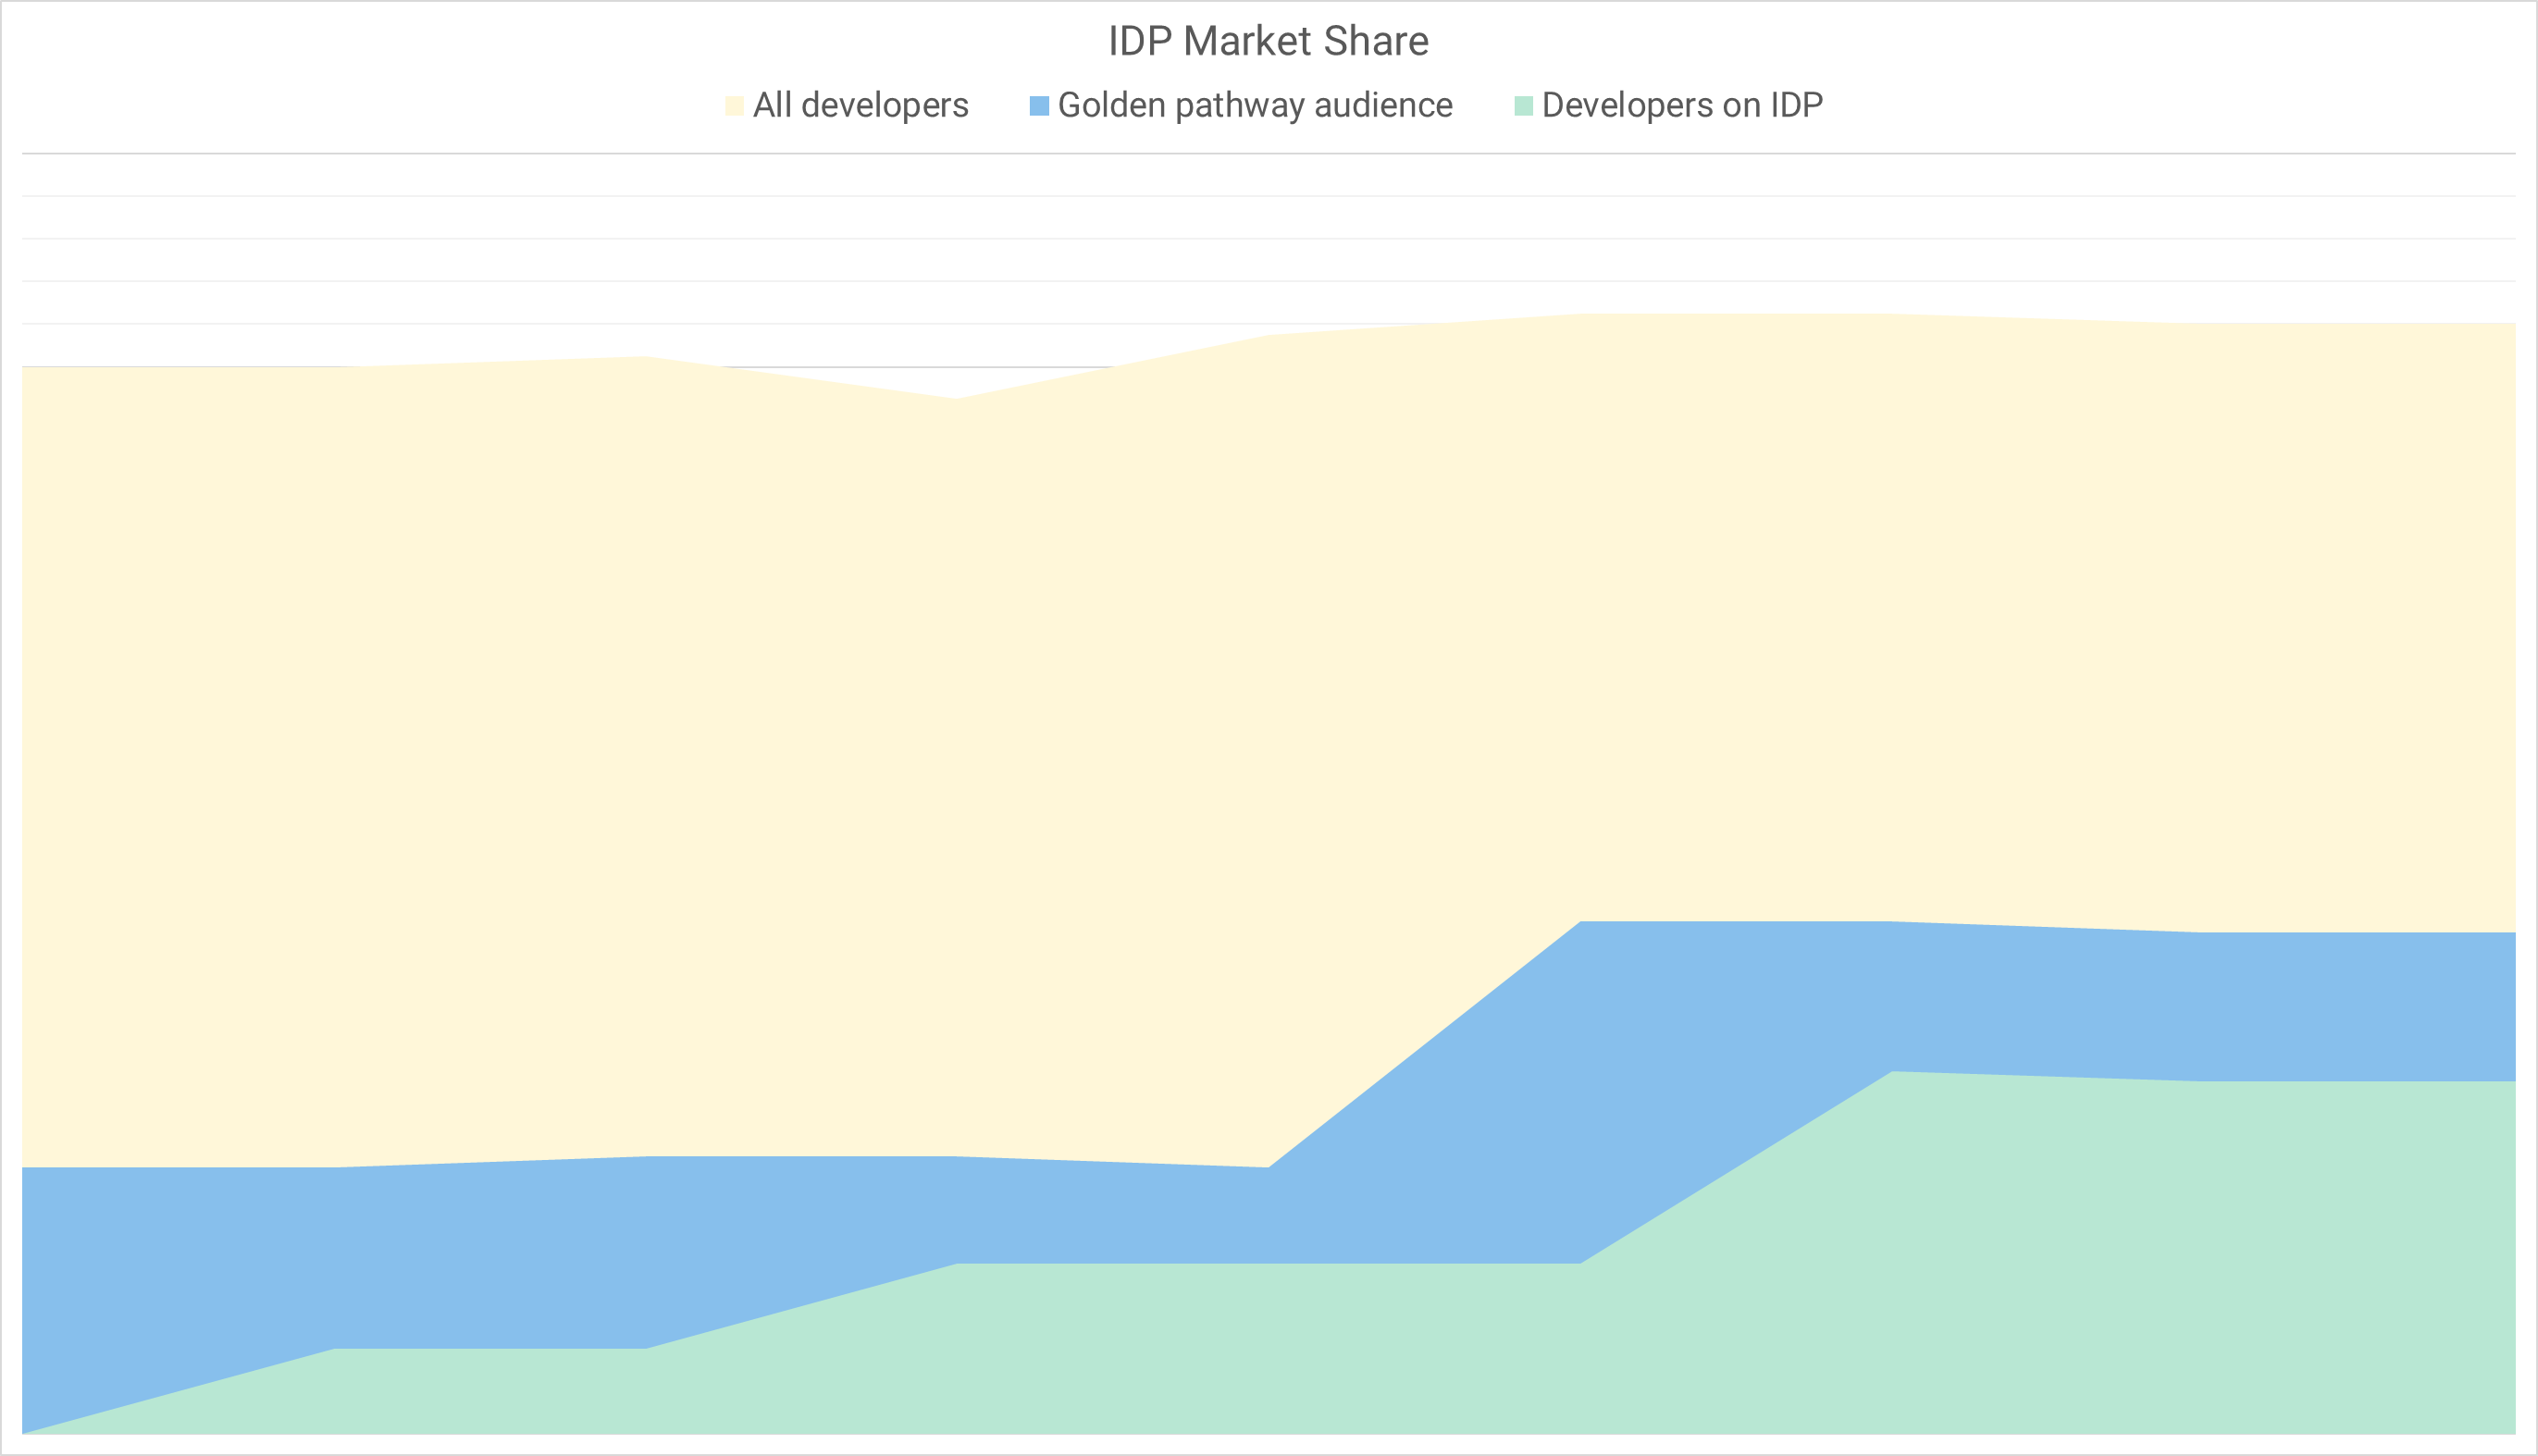 Tracking the total number of developers, the number of developers who could use the internal developer platform, and the adoption of the platform are key metrics